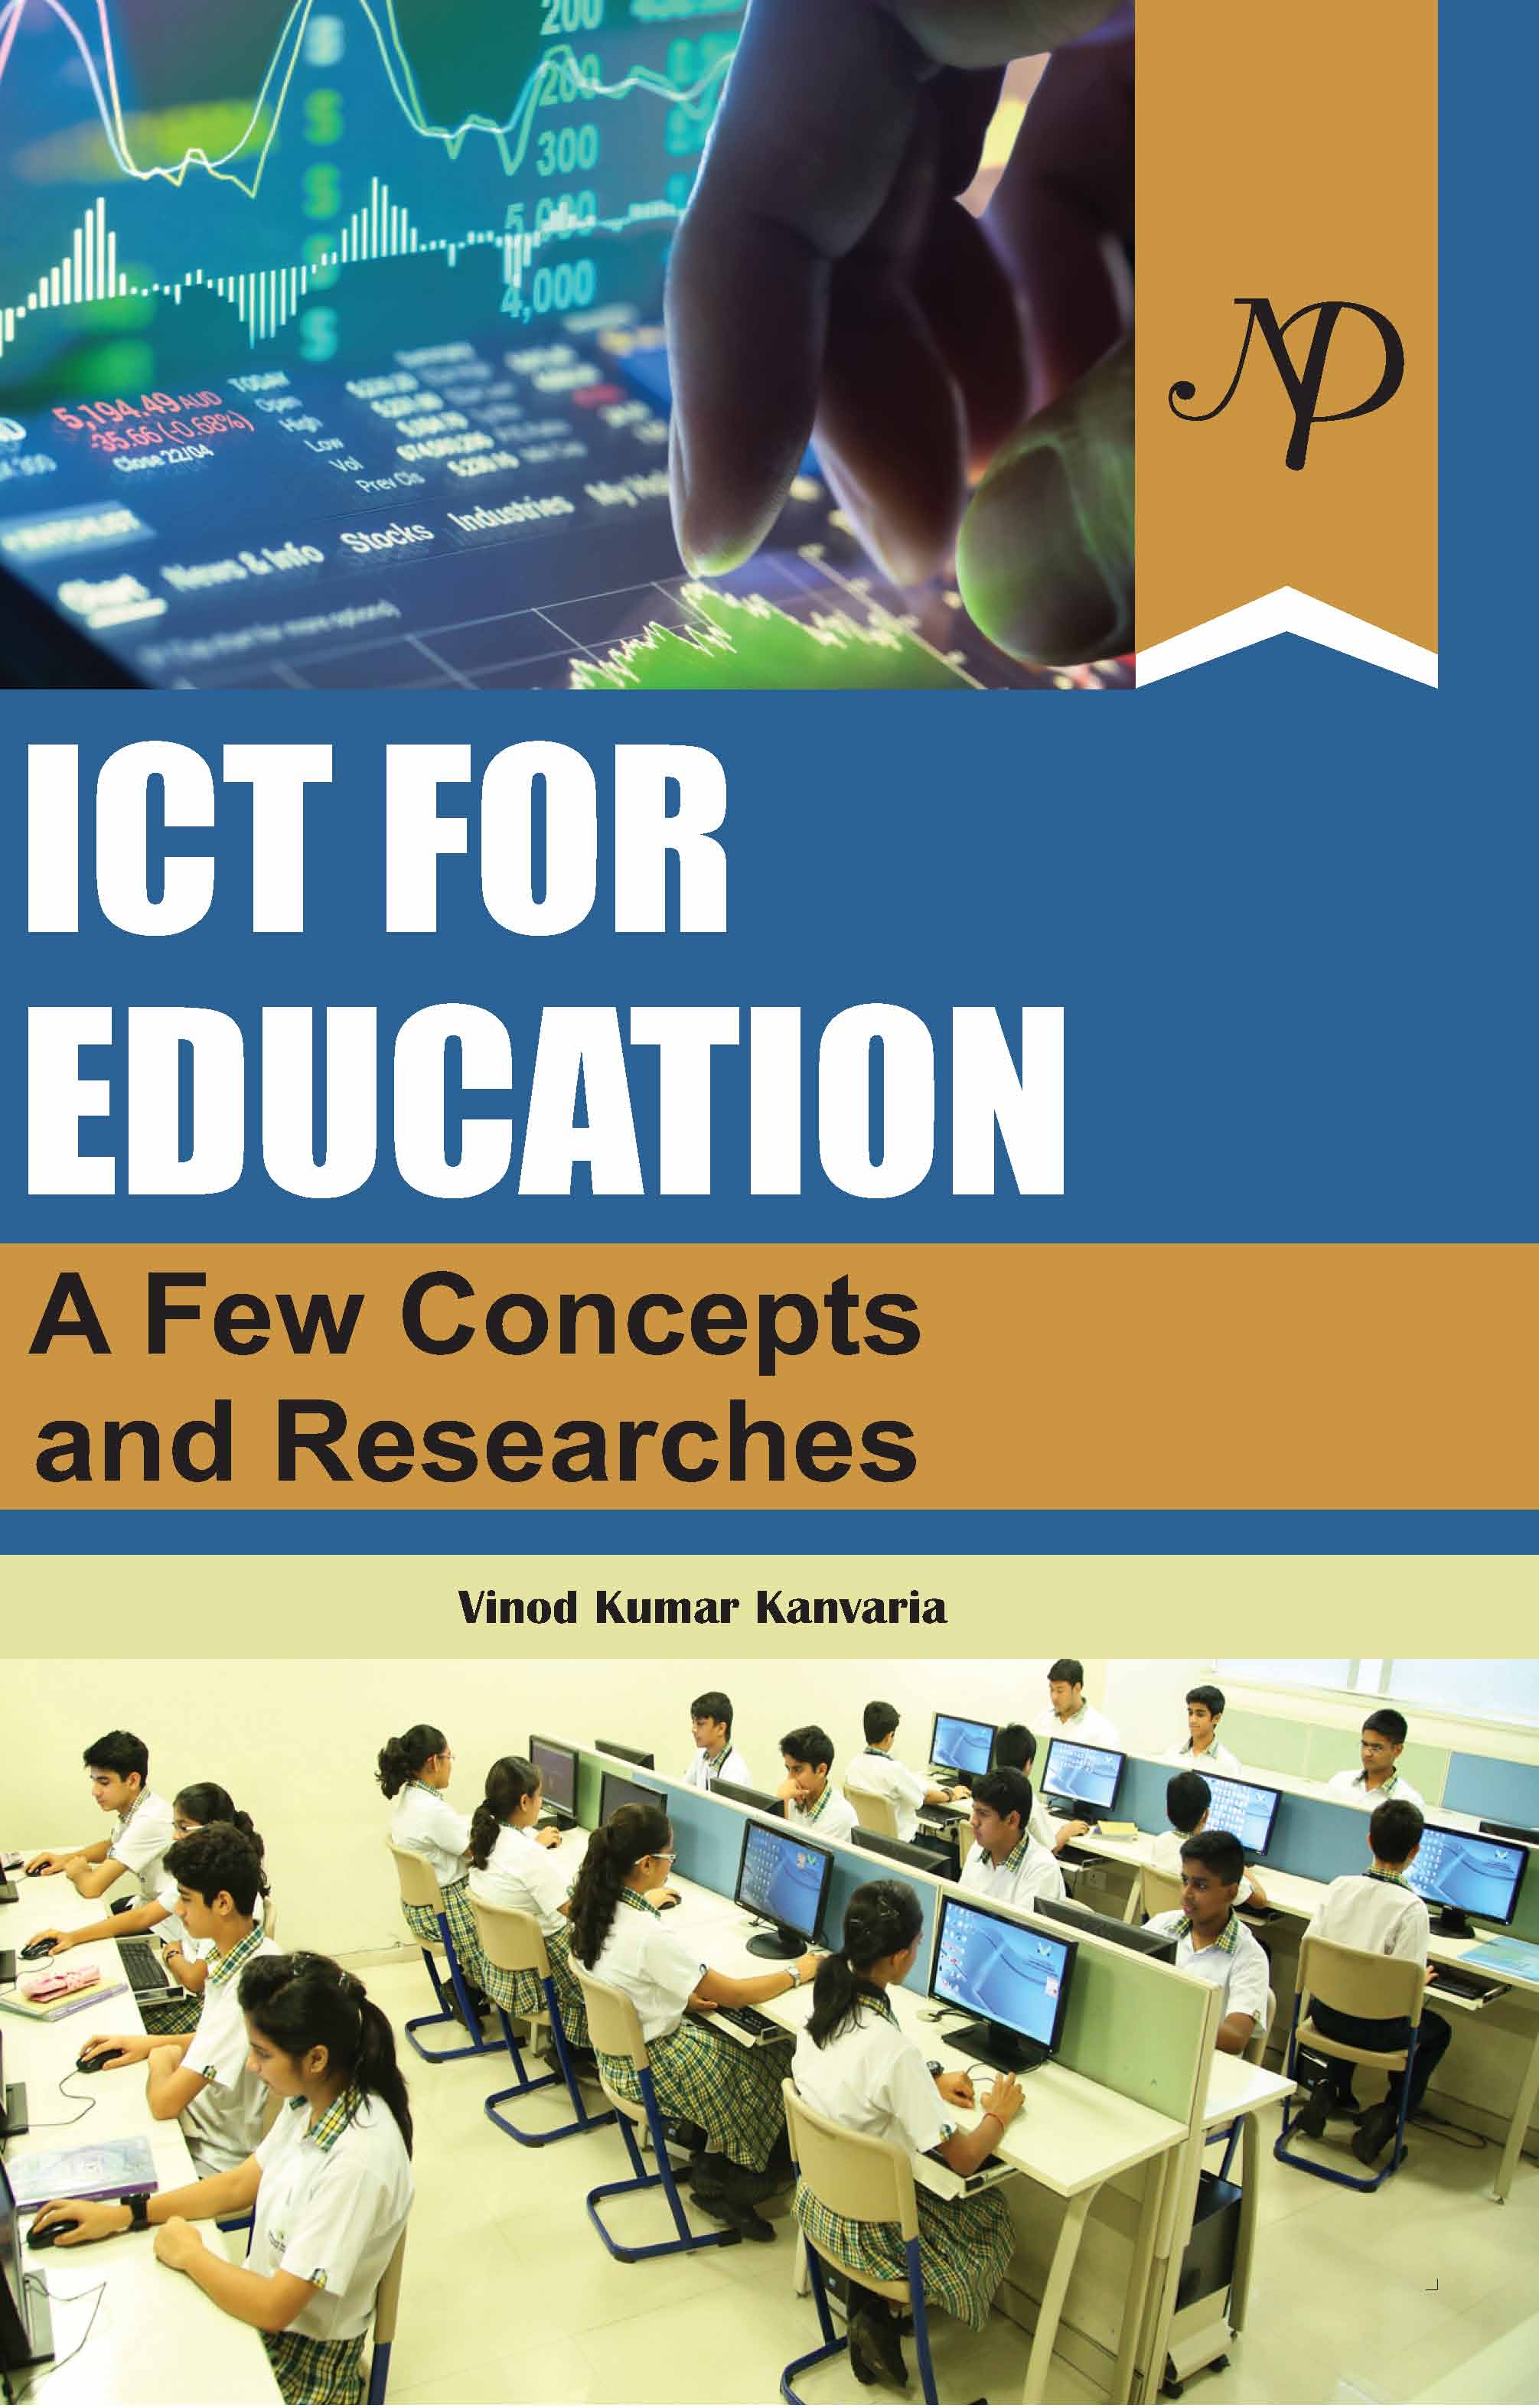 Cover ICT for Education A Few Concepts and Researches.pdf final.jpg